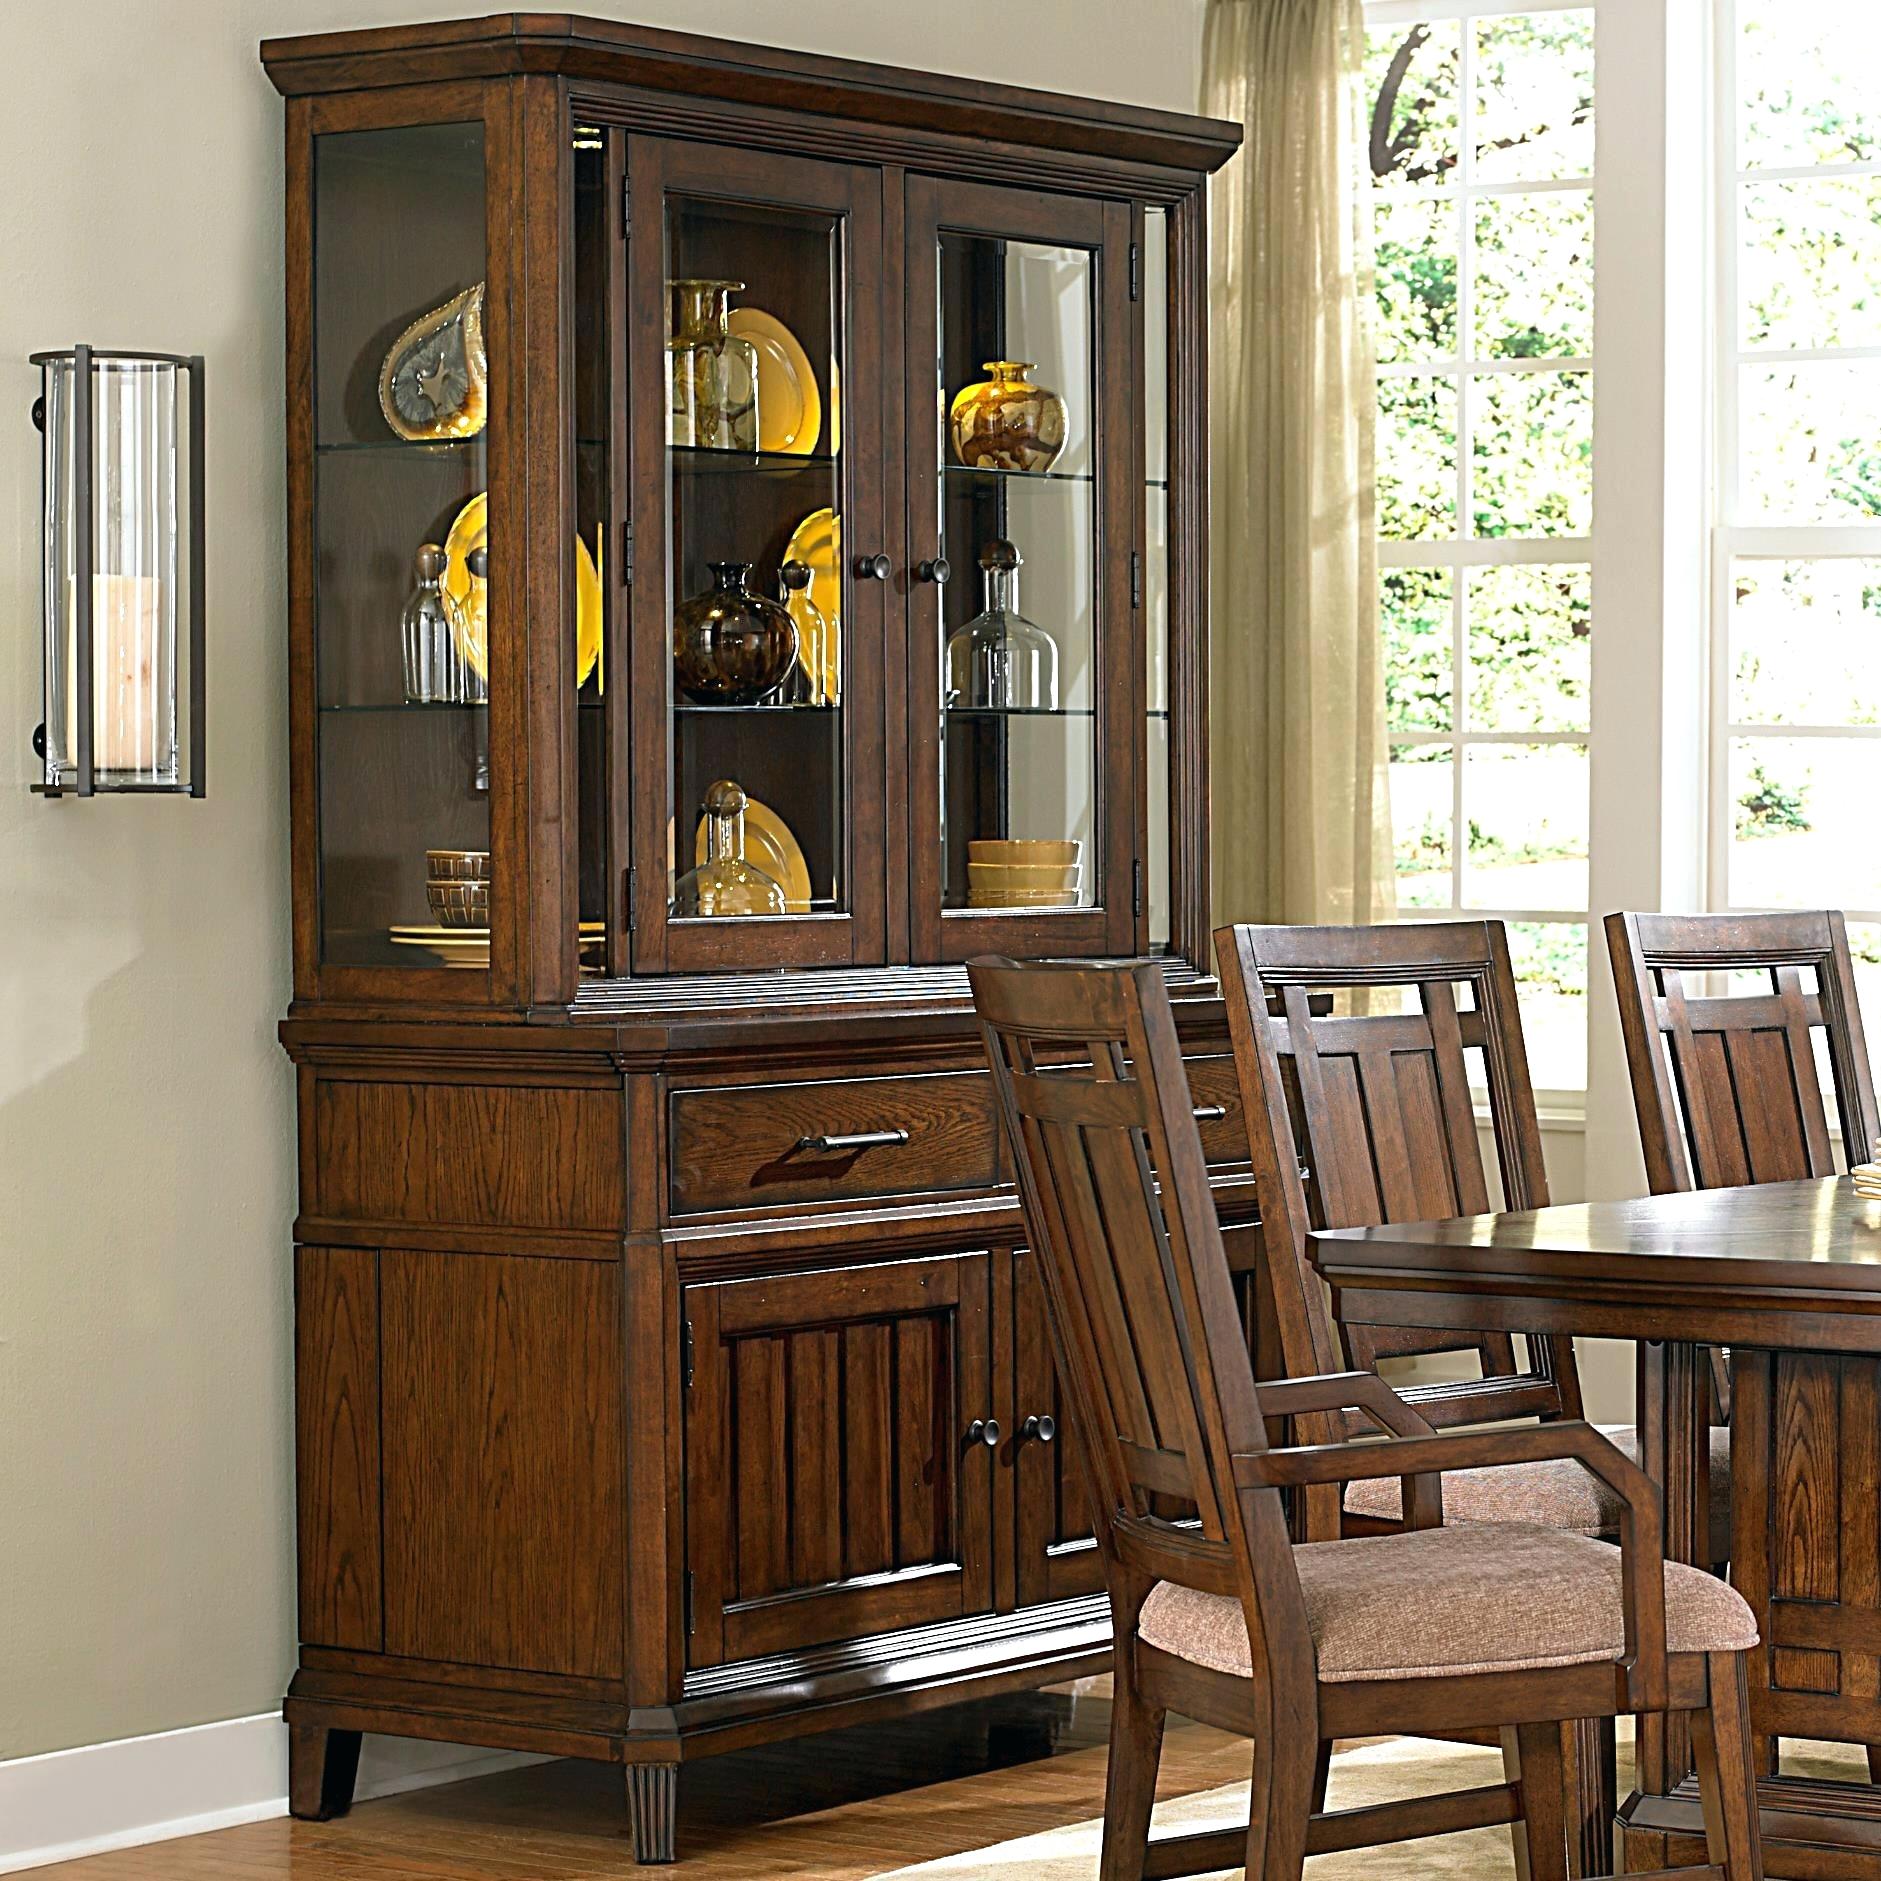 broyhill curio cabinet furniture park china cabinet with built in leaf storage and led lighting broyhill curio cabinets